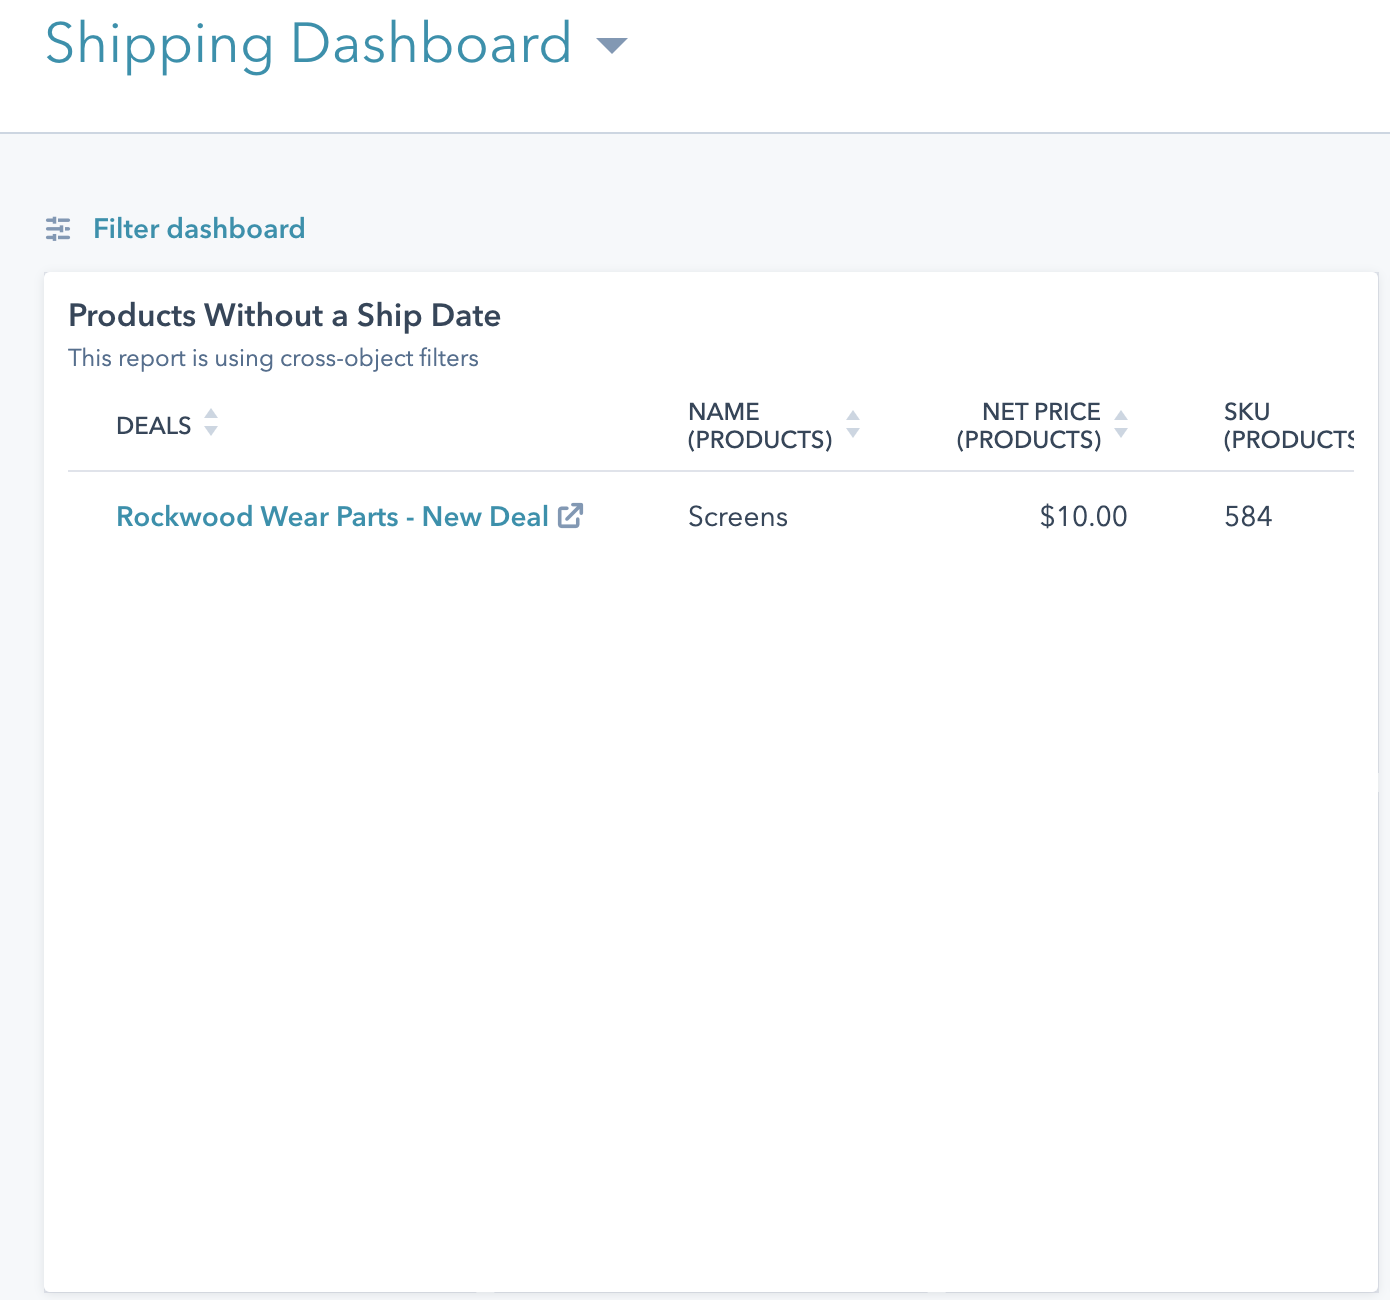 A view of the Shipping Dashboard, with a new deal featured